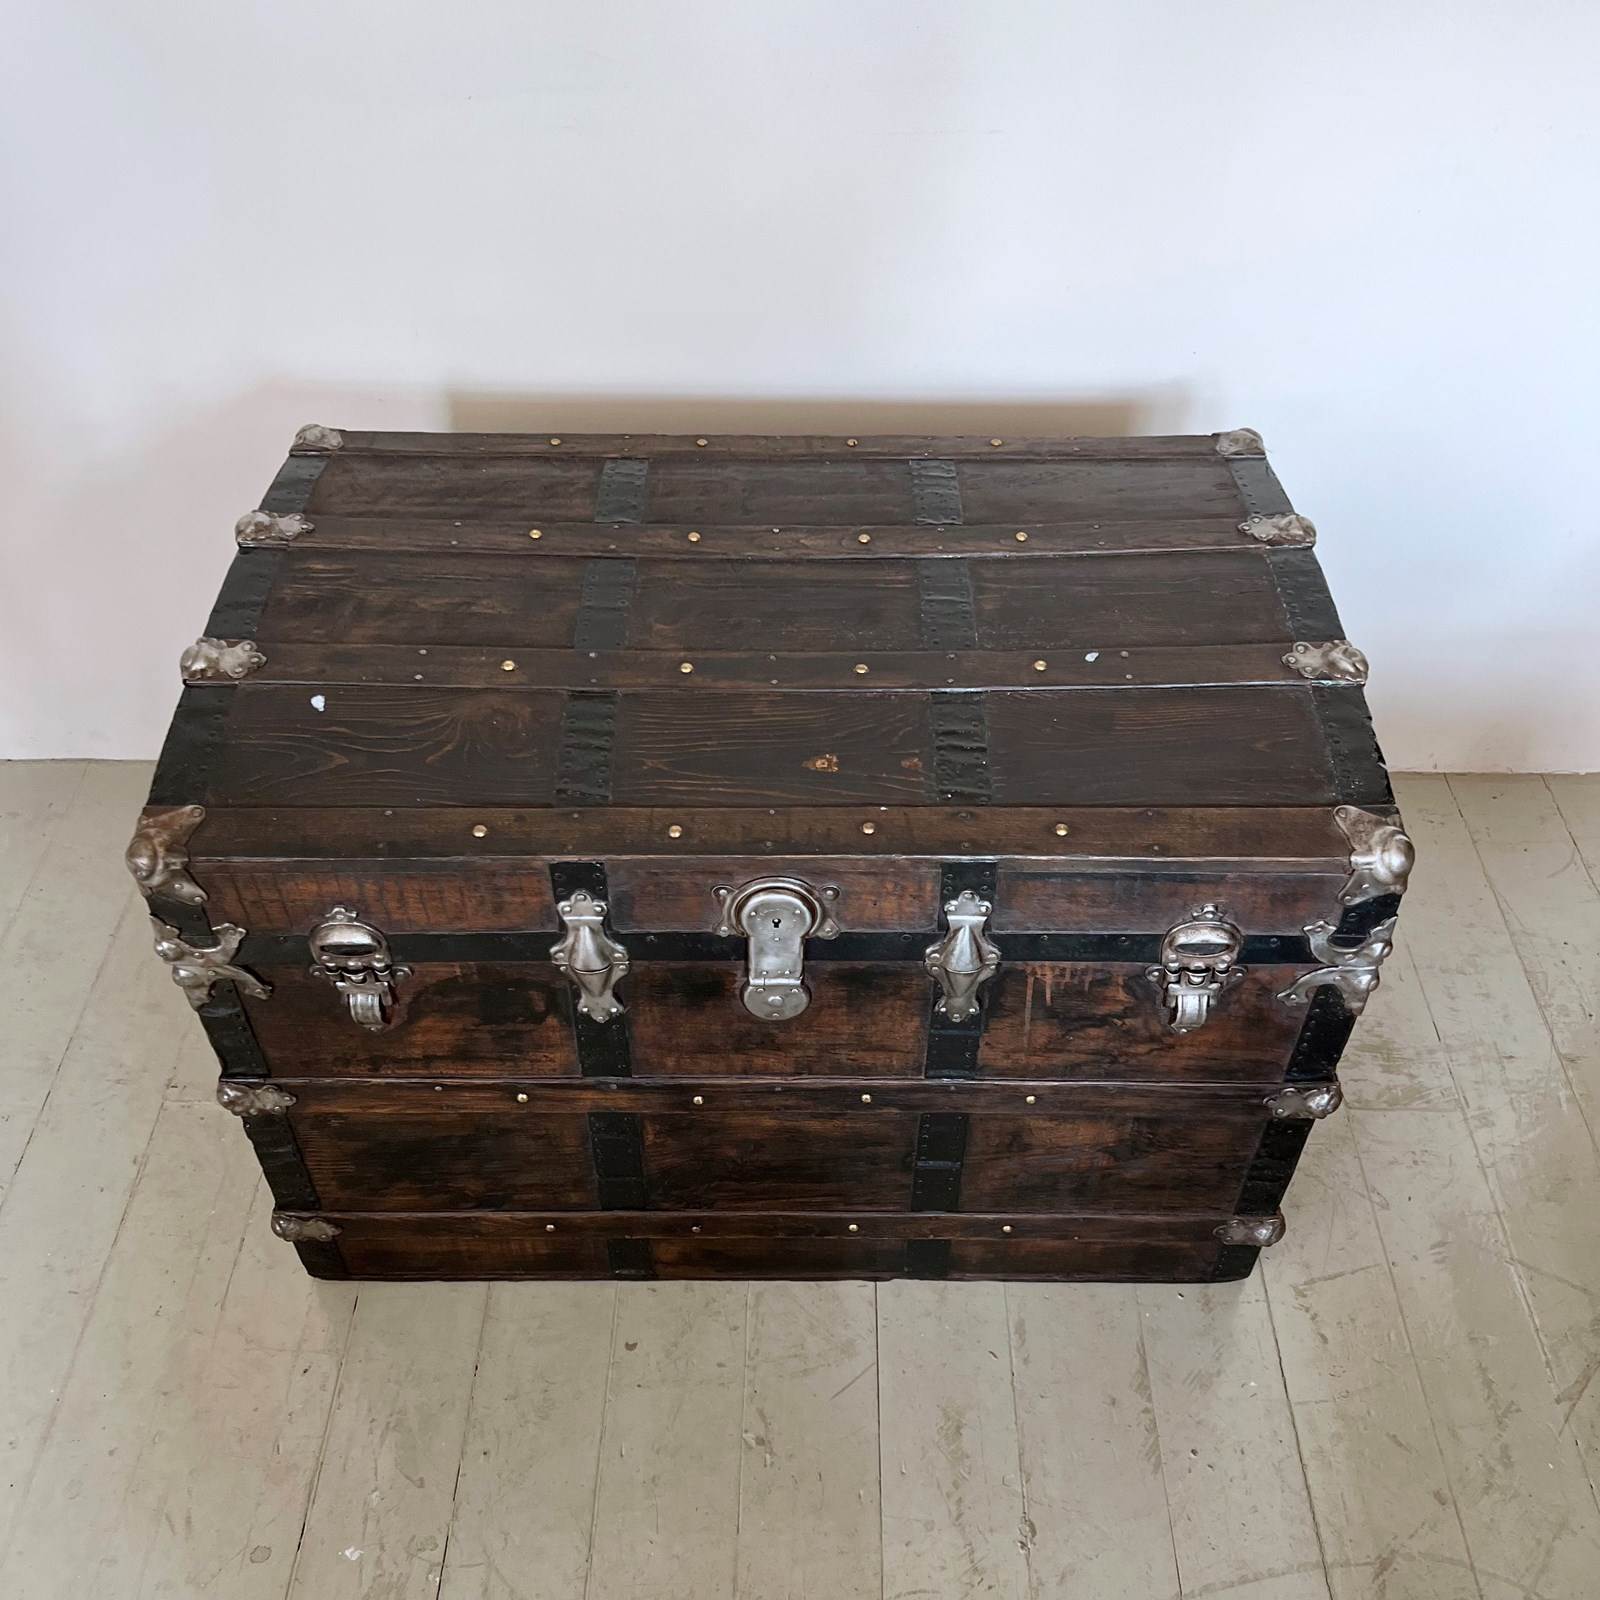 1900s Small Steamer Trunk Made by the Eagle Lock Co